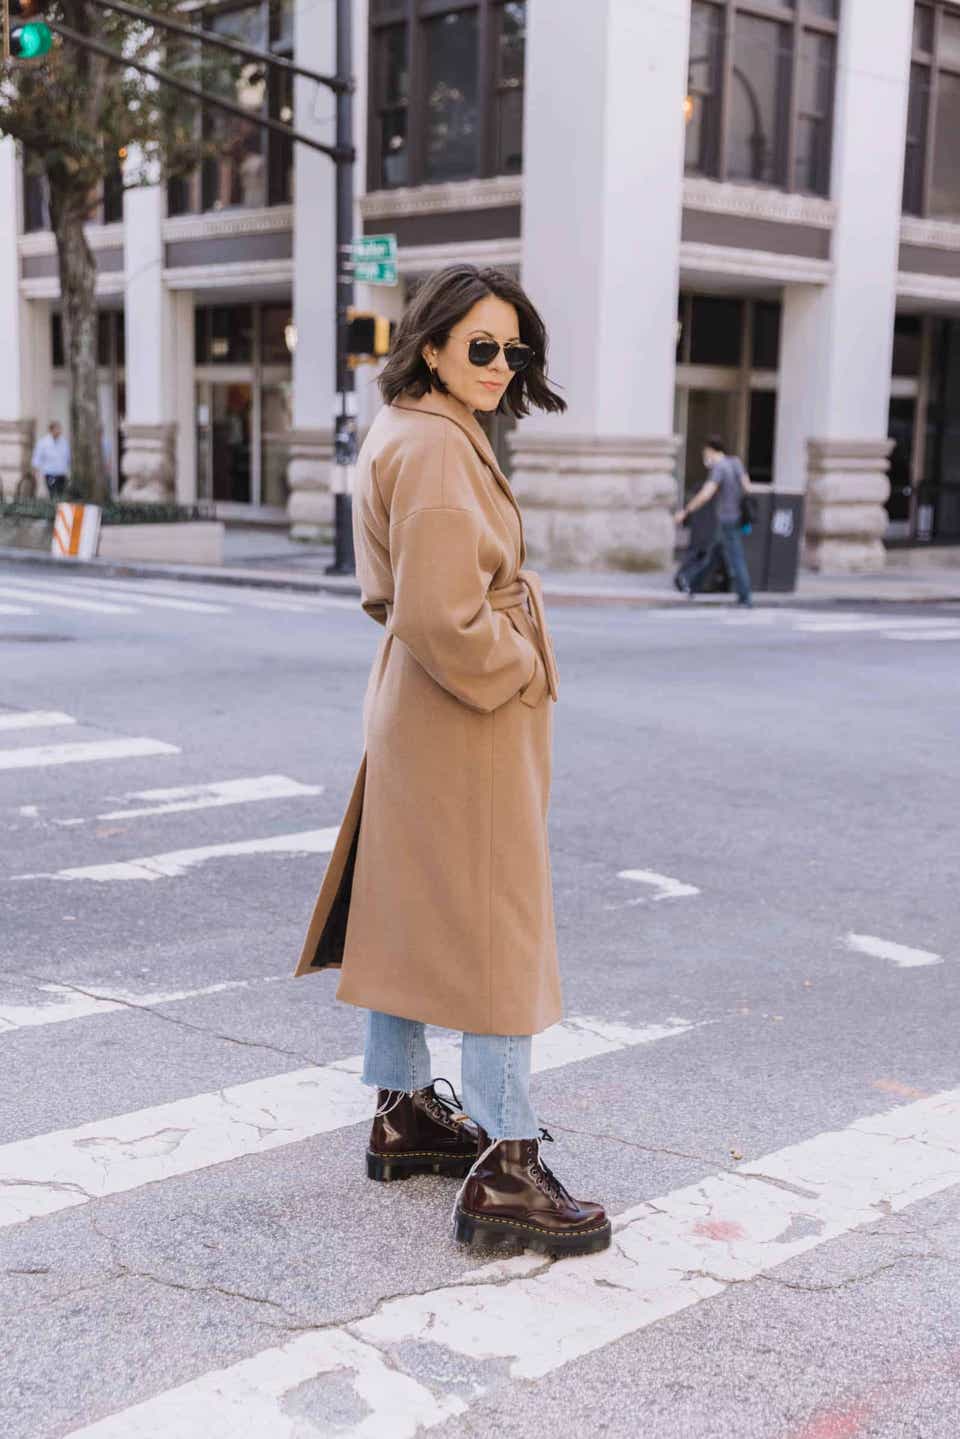 a woman walks on the street wearing a camel coat, blue jeans, and red dr. martens boots